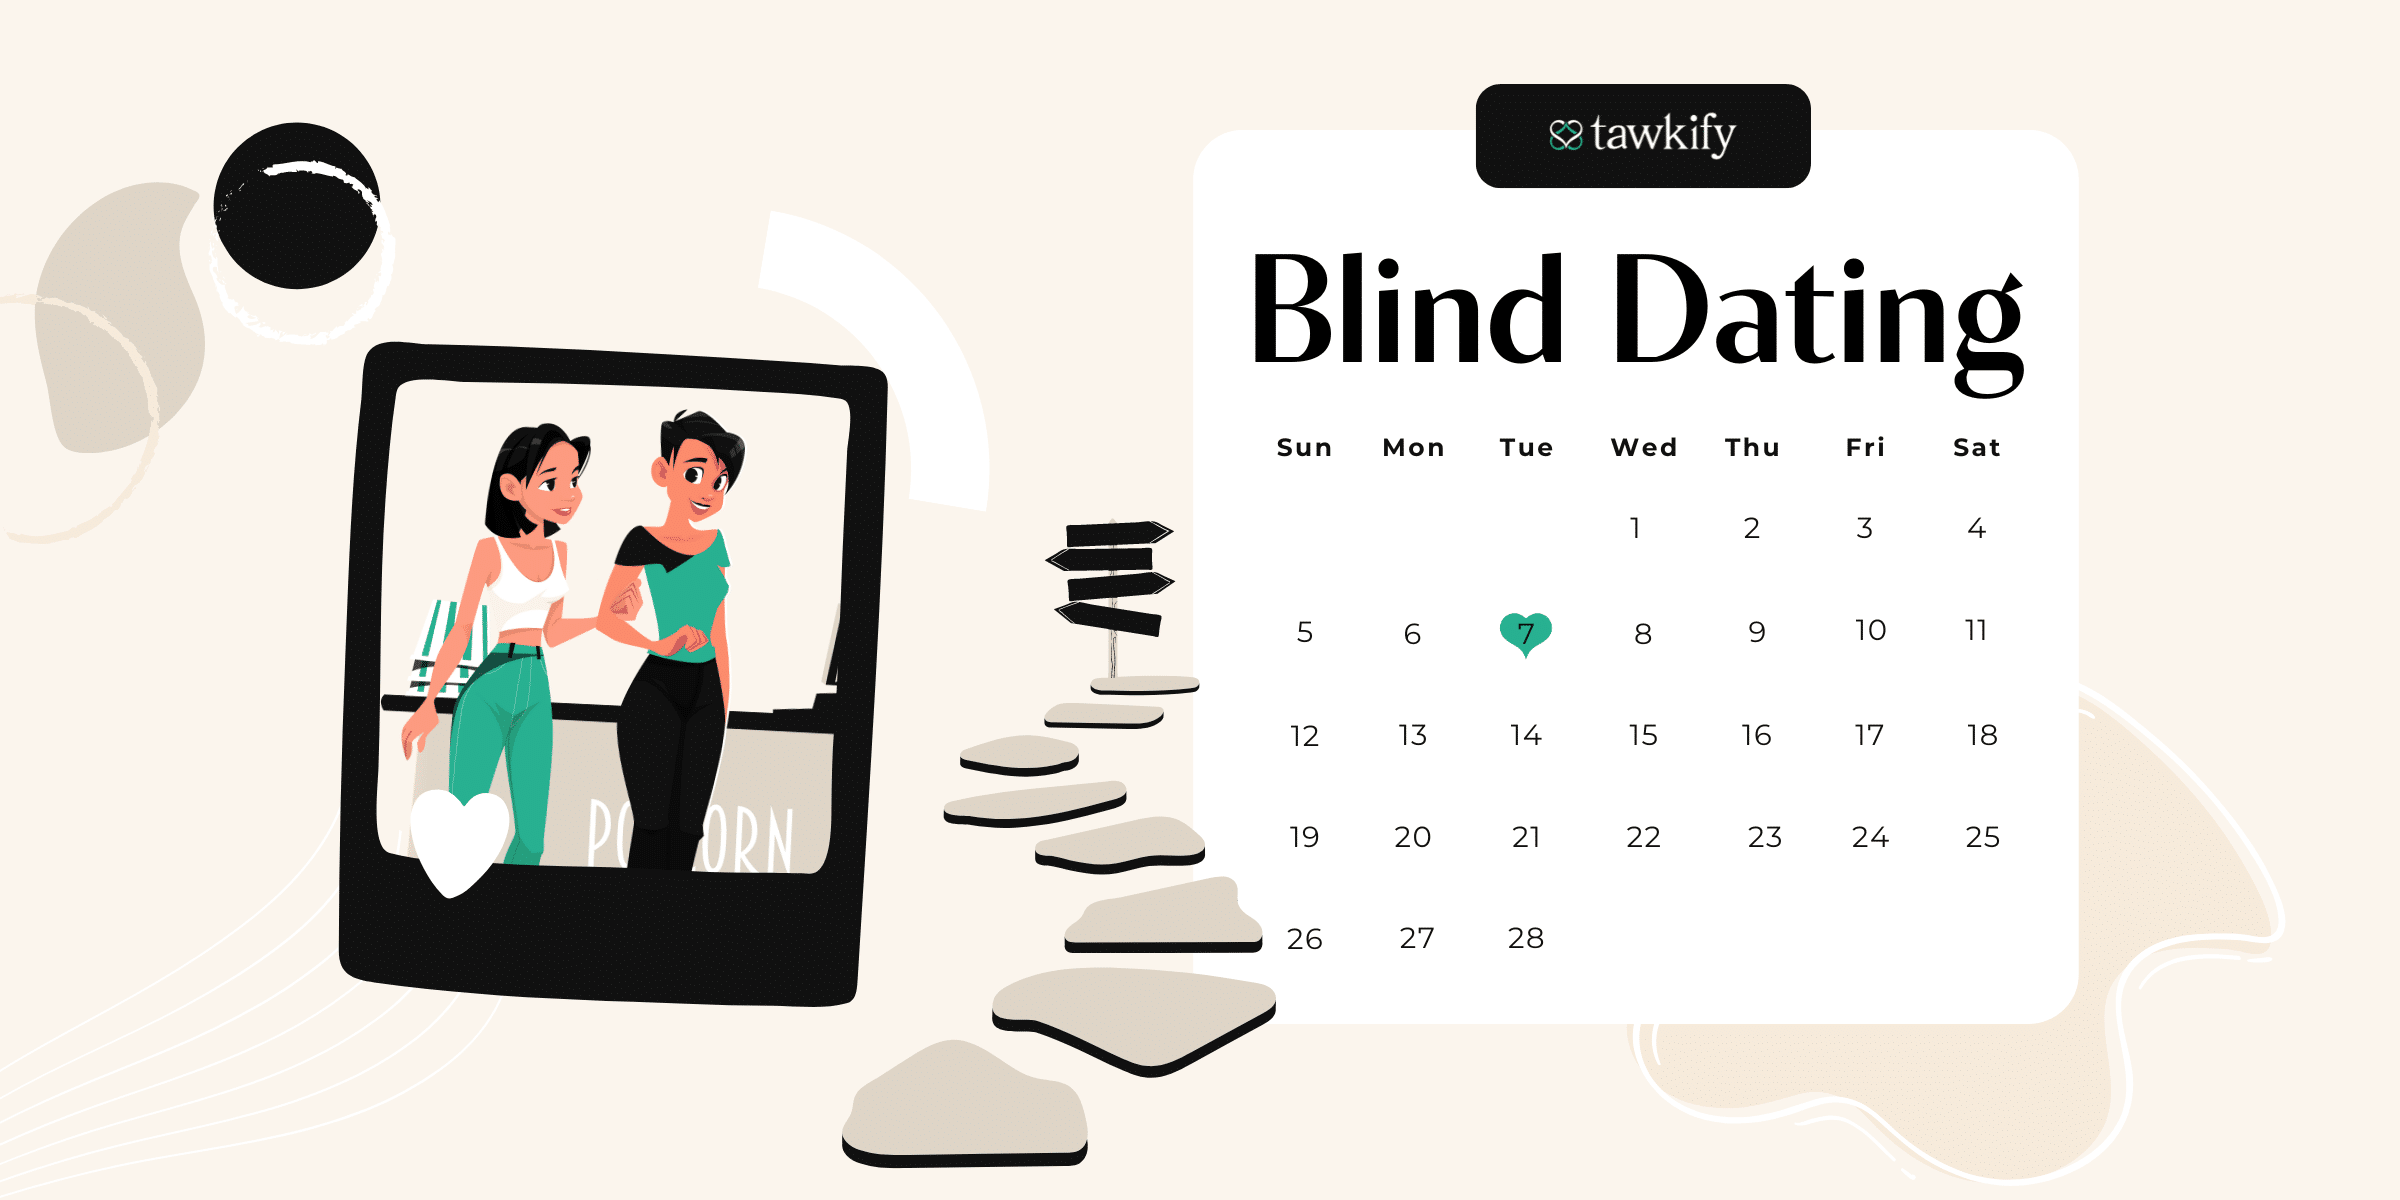 Are blind dates a good idea? Yes! Find out why going on blind dates can reduce dating fatigue, help you find meaningful connections, and give you the best chance at finding love.